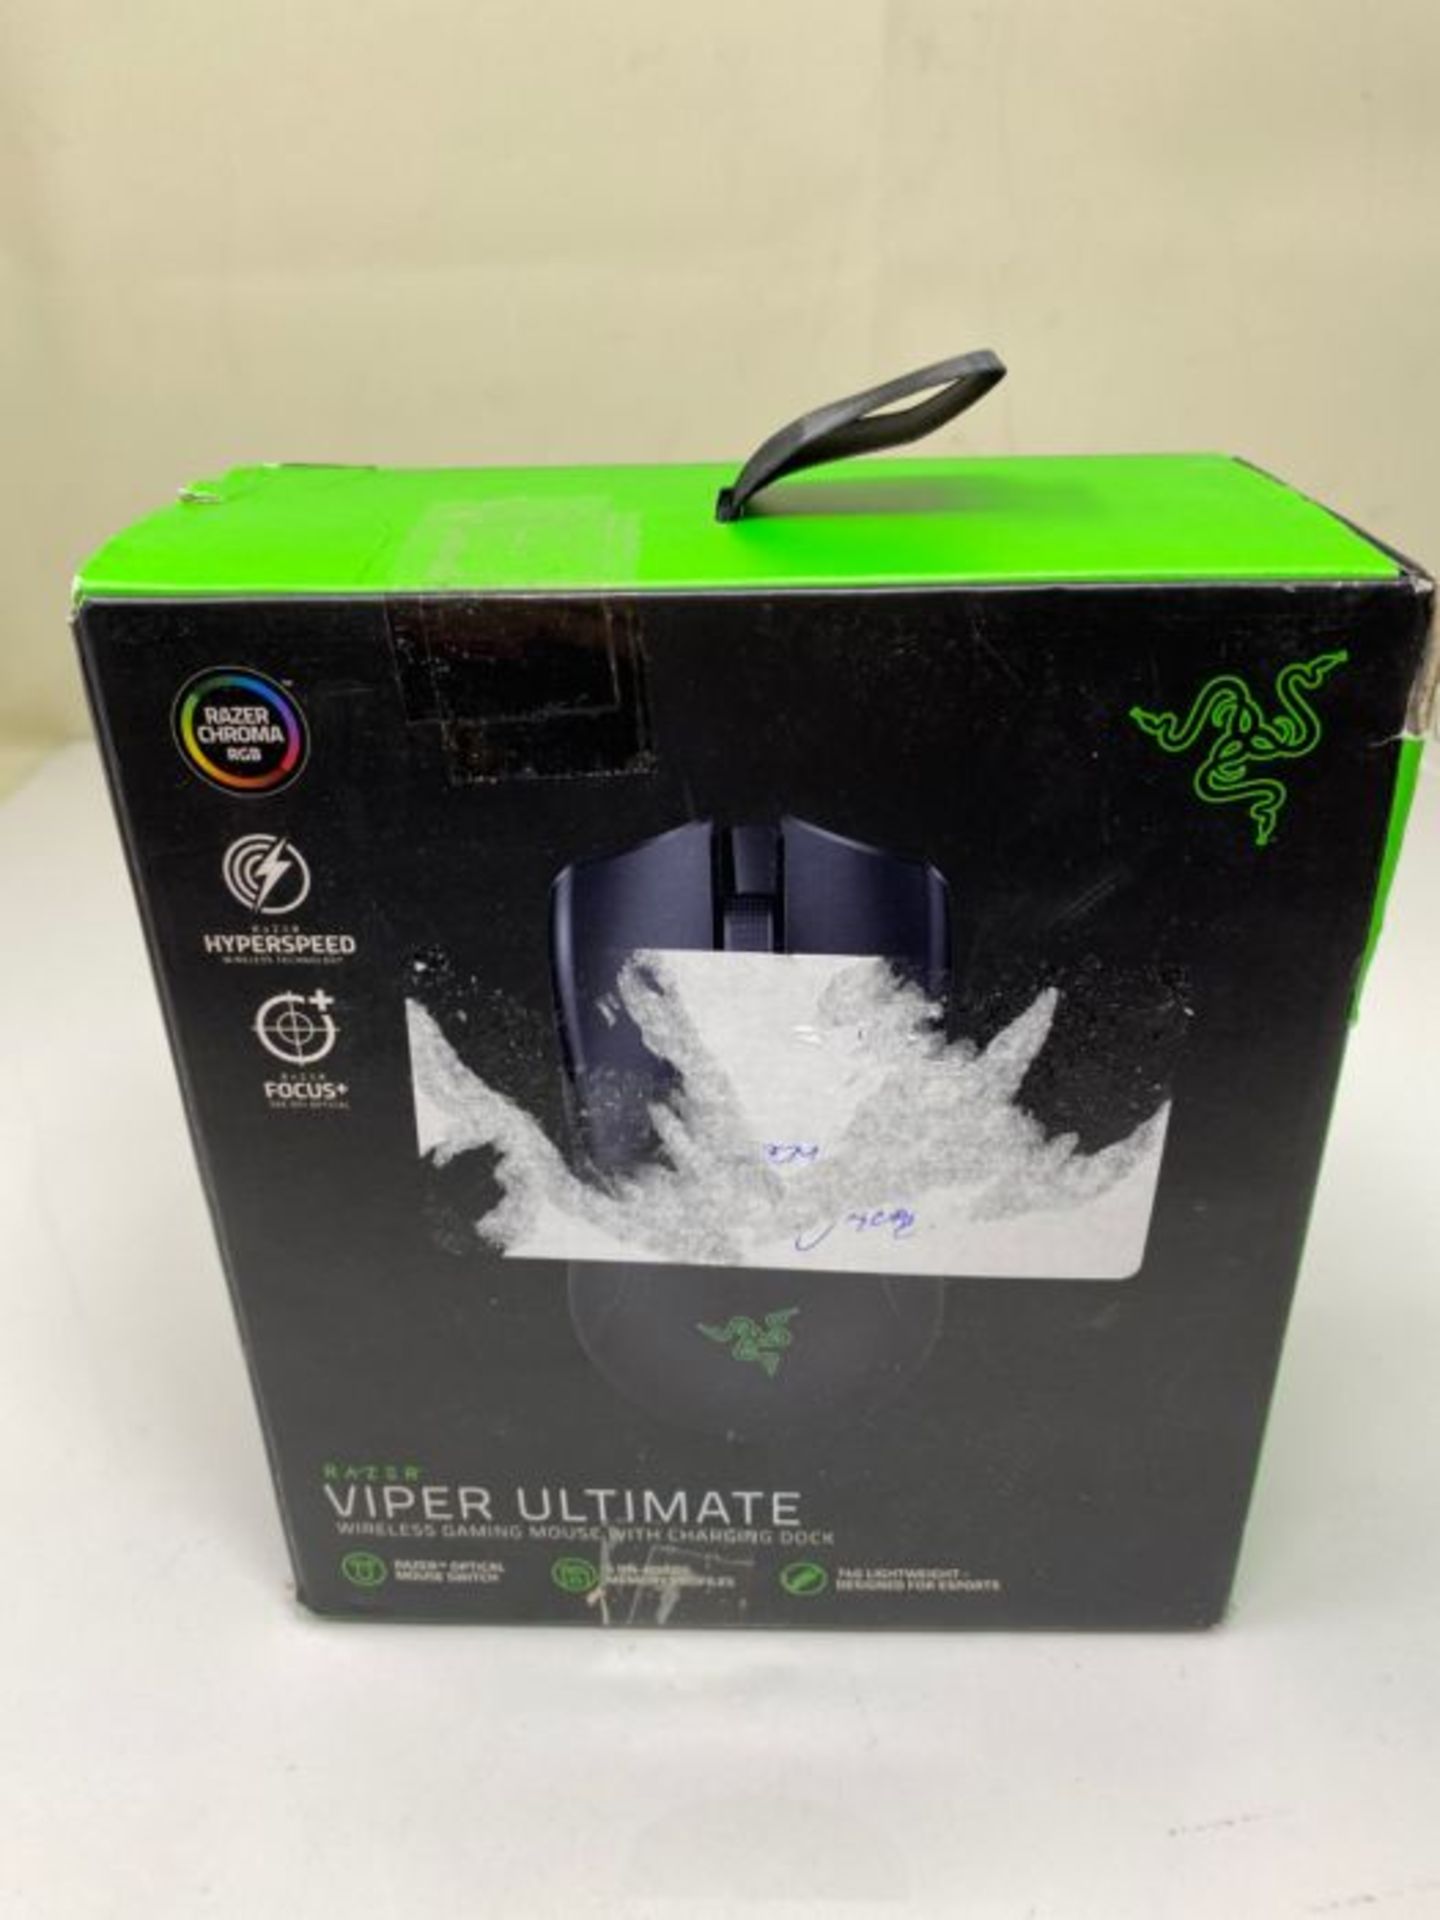 RRP £109.00 Razer Viper Ultimate Ambidextrous Gaming Mouse with Charging Dock - Black - Image 2 of 3